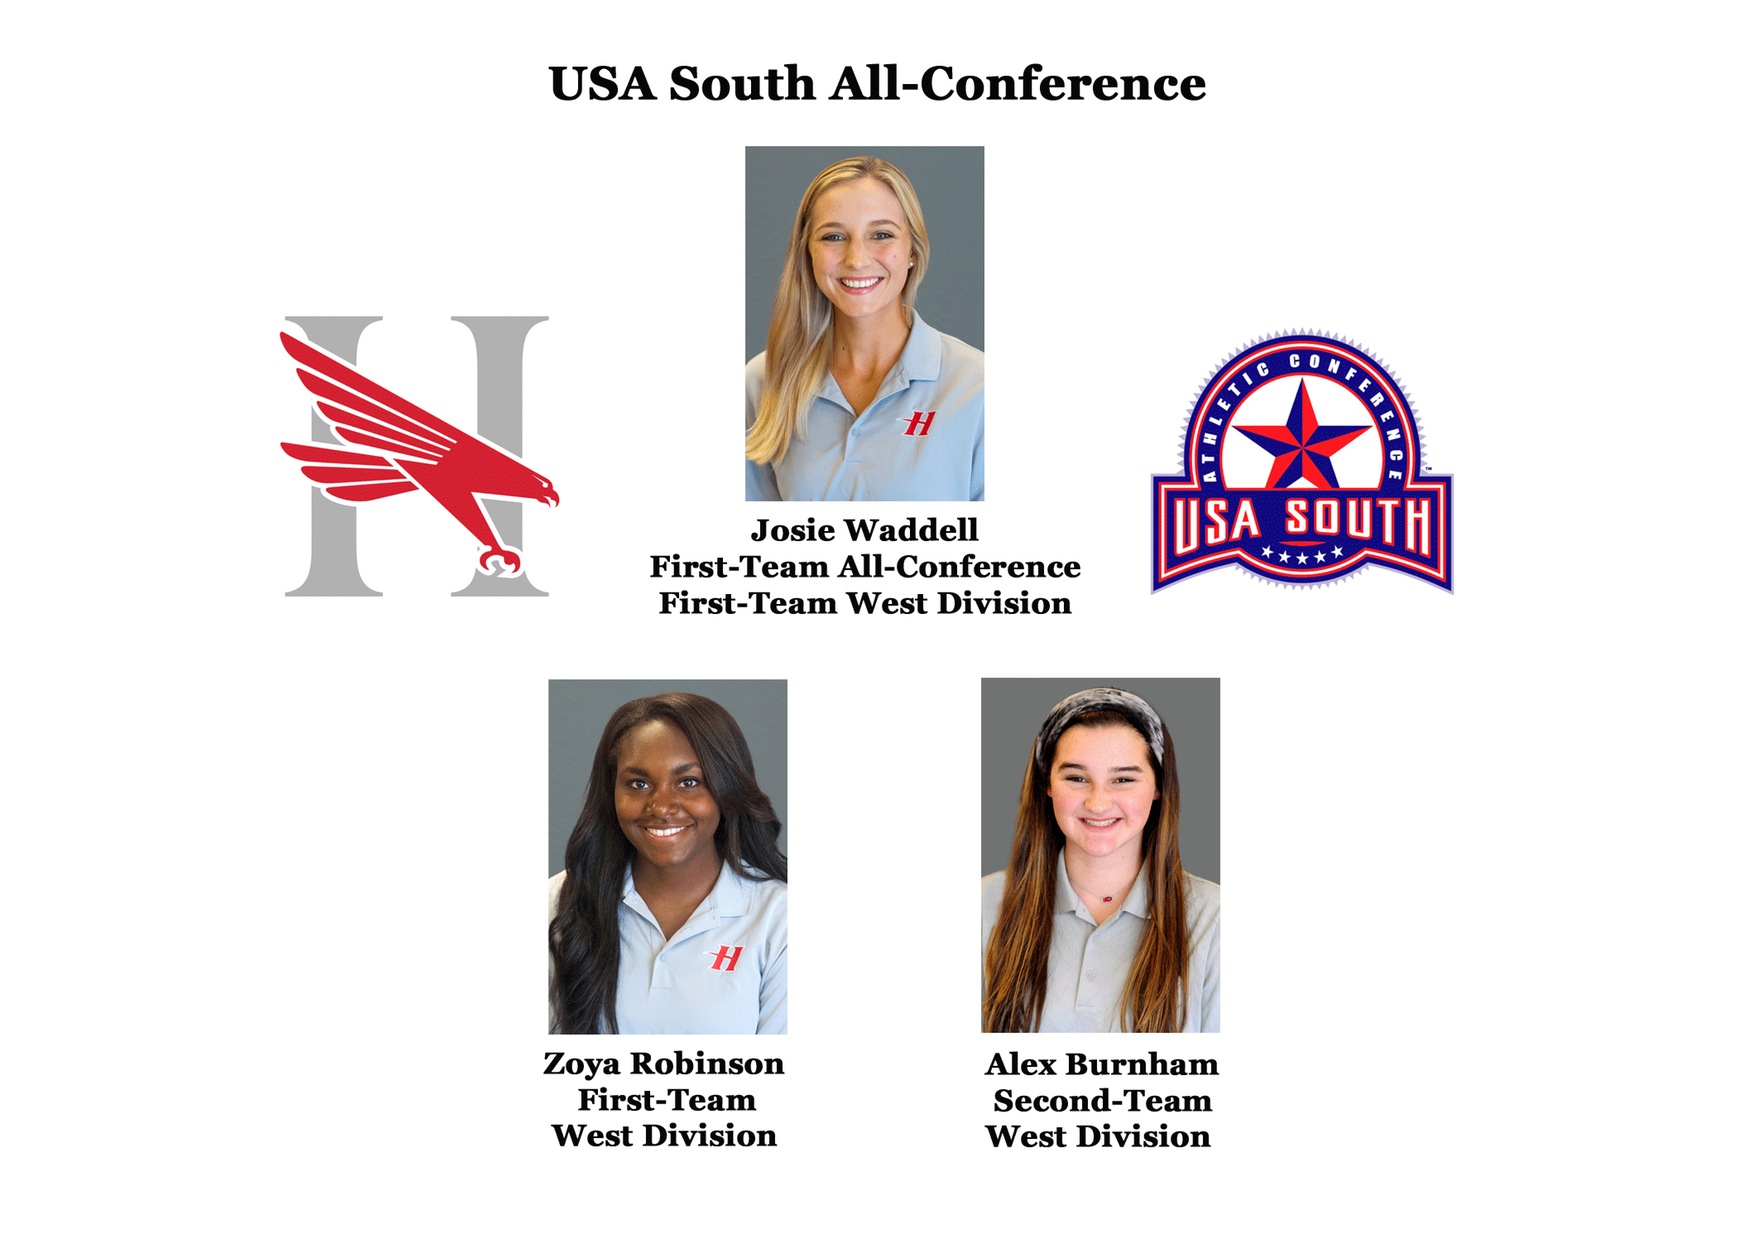 Waddell named 1st-team All-Conference, Robinson and Burnham named All-Division